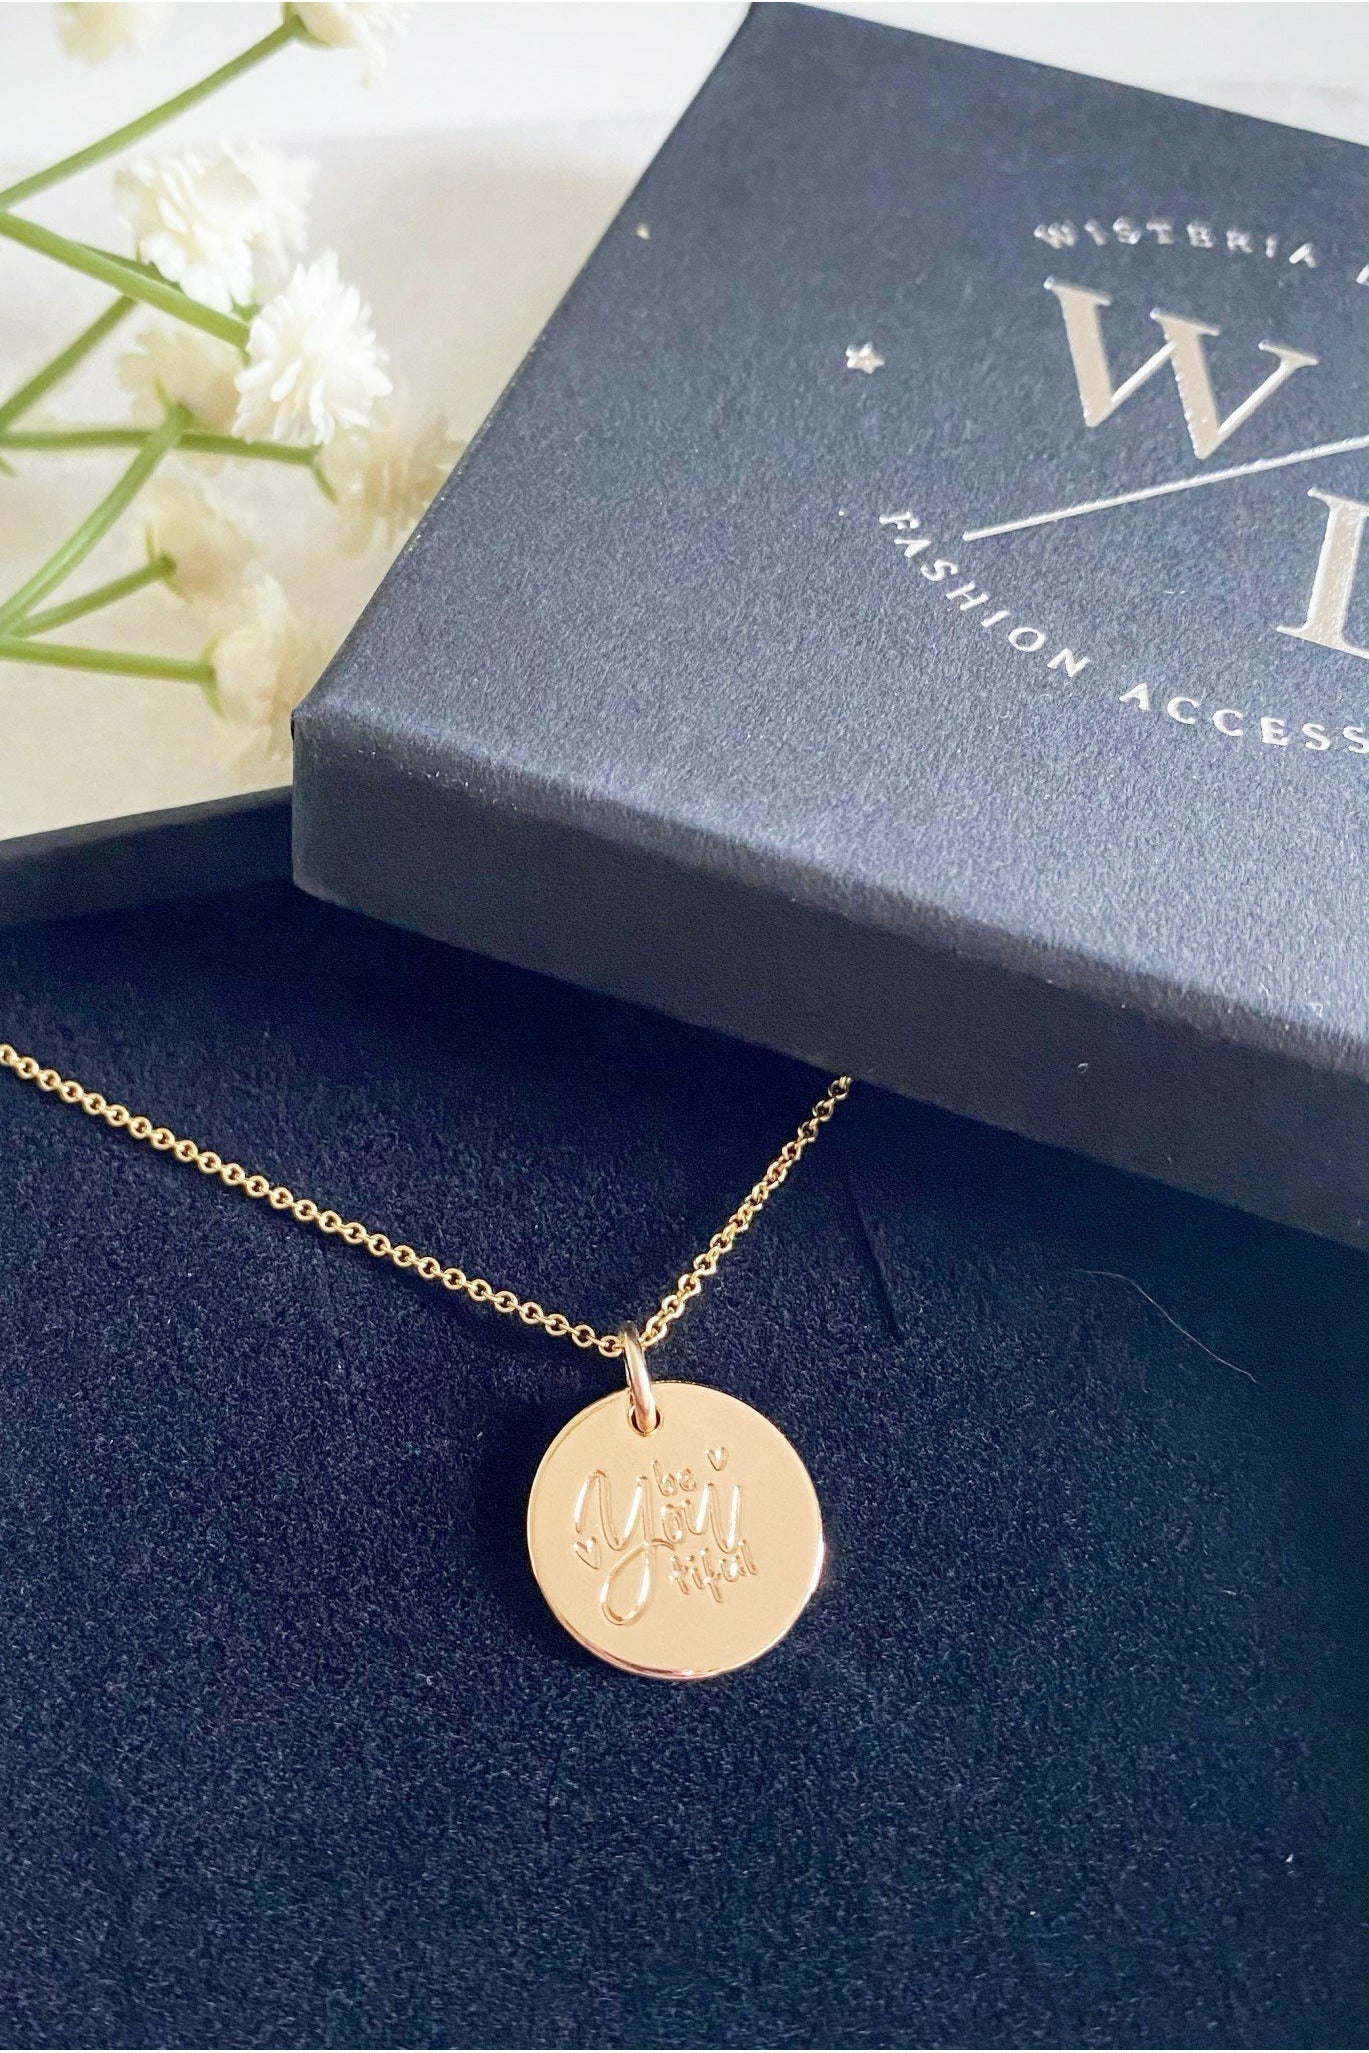 BE YOUtiful Gold Coin Necklace BE YOUtiful Gold Coin Necklace